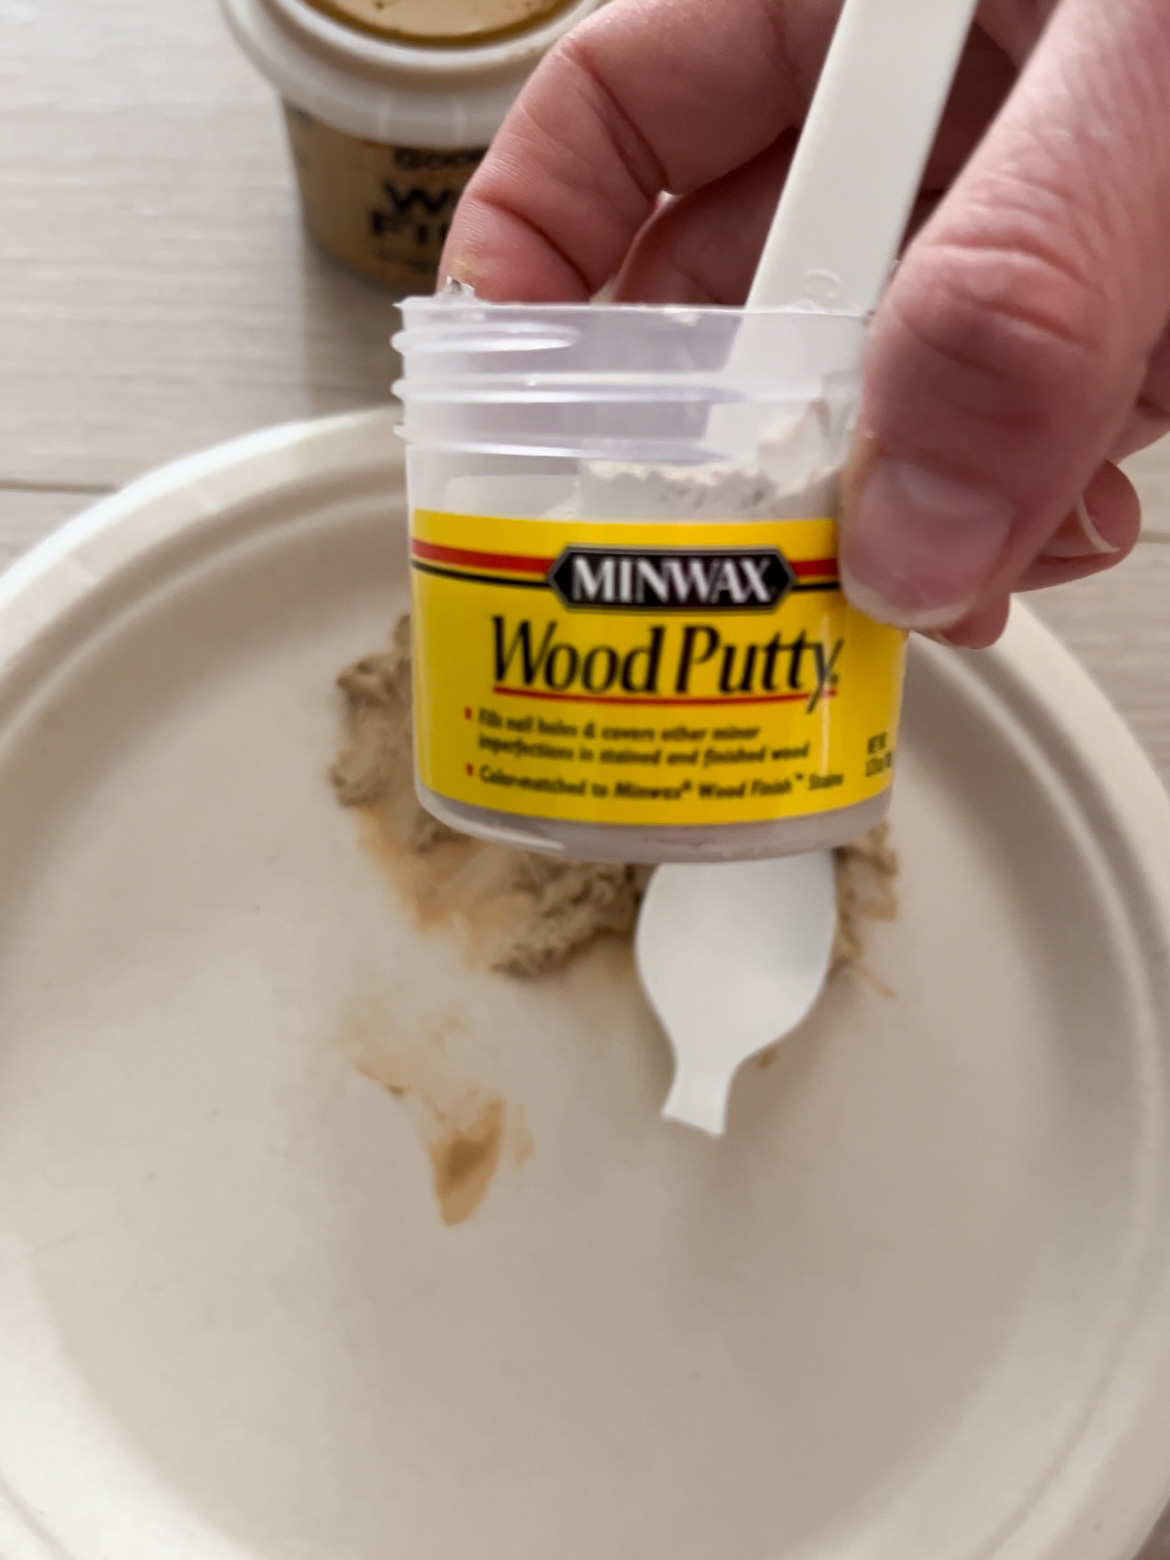 Hand holding a tub of Minwax Wood Putty.